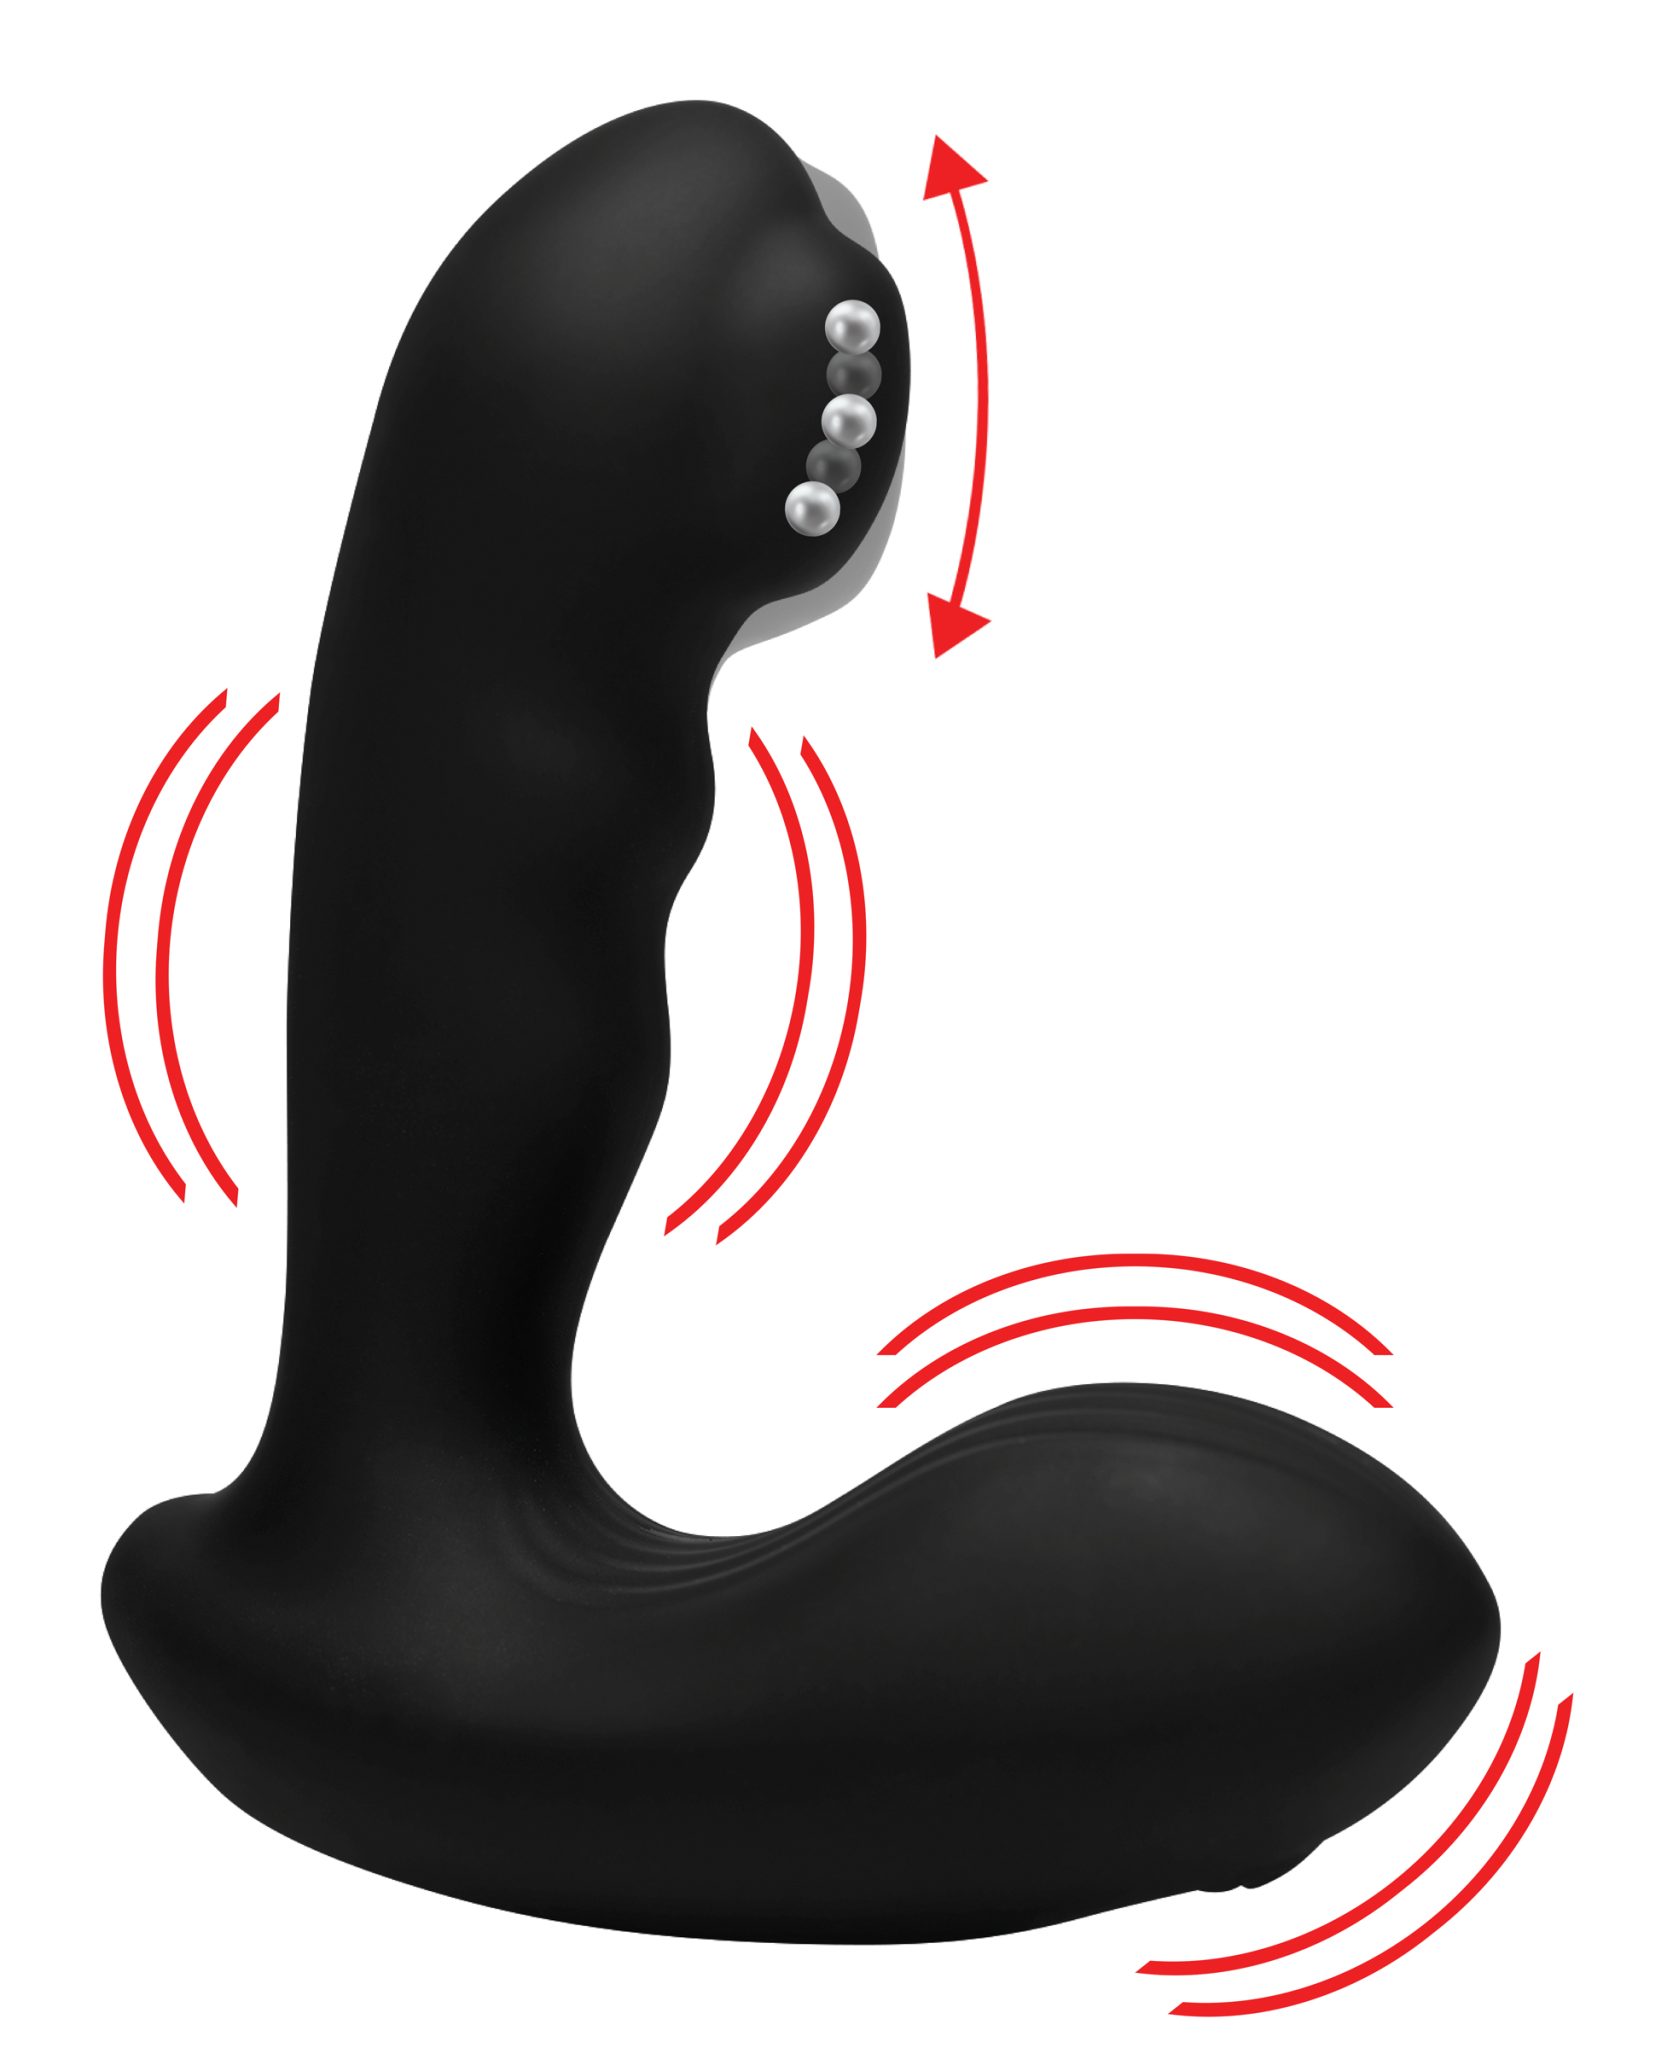 7X P-Milker Silicone Prostate Stimulator with Milking Bead